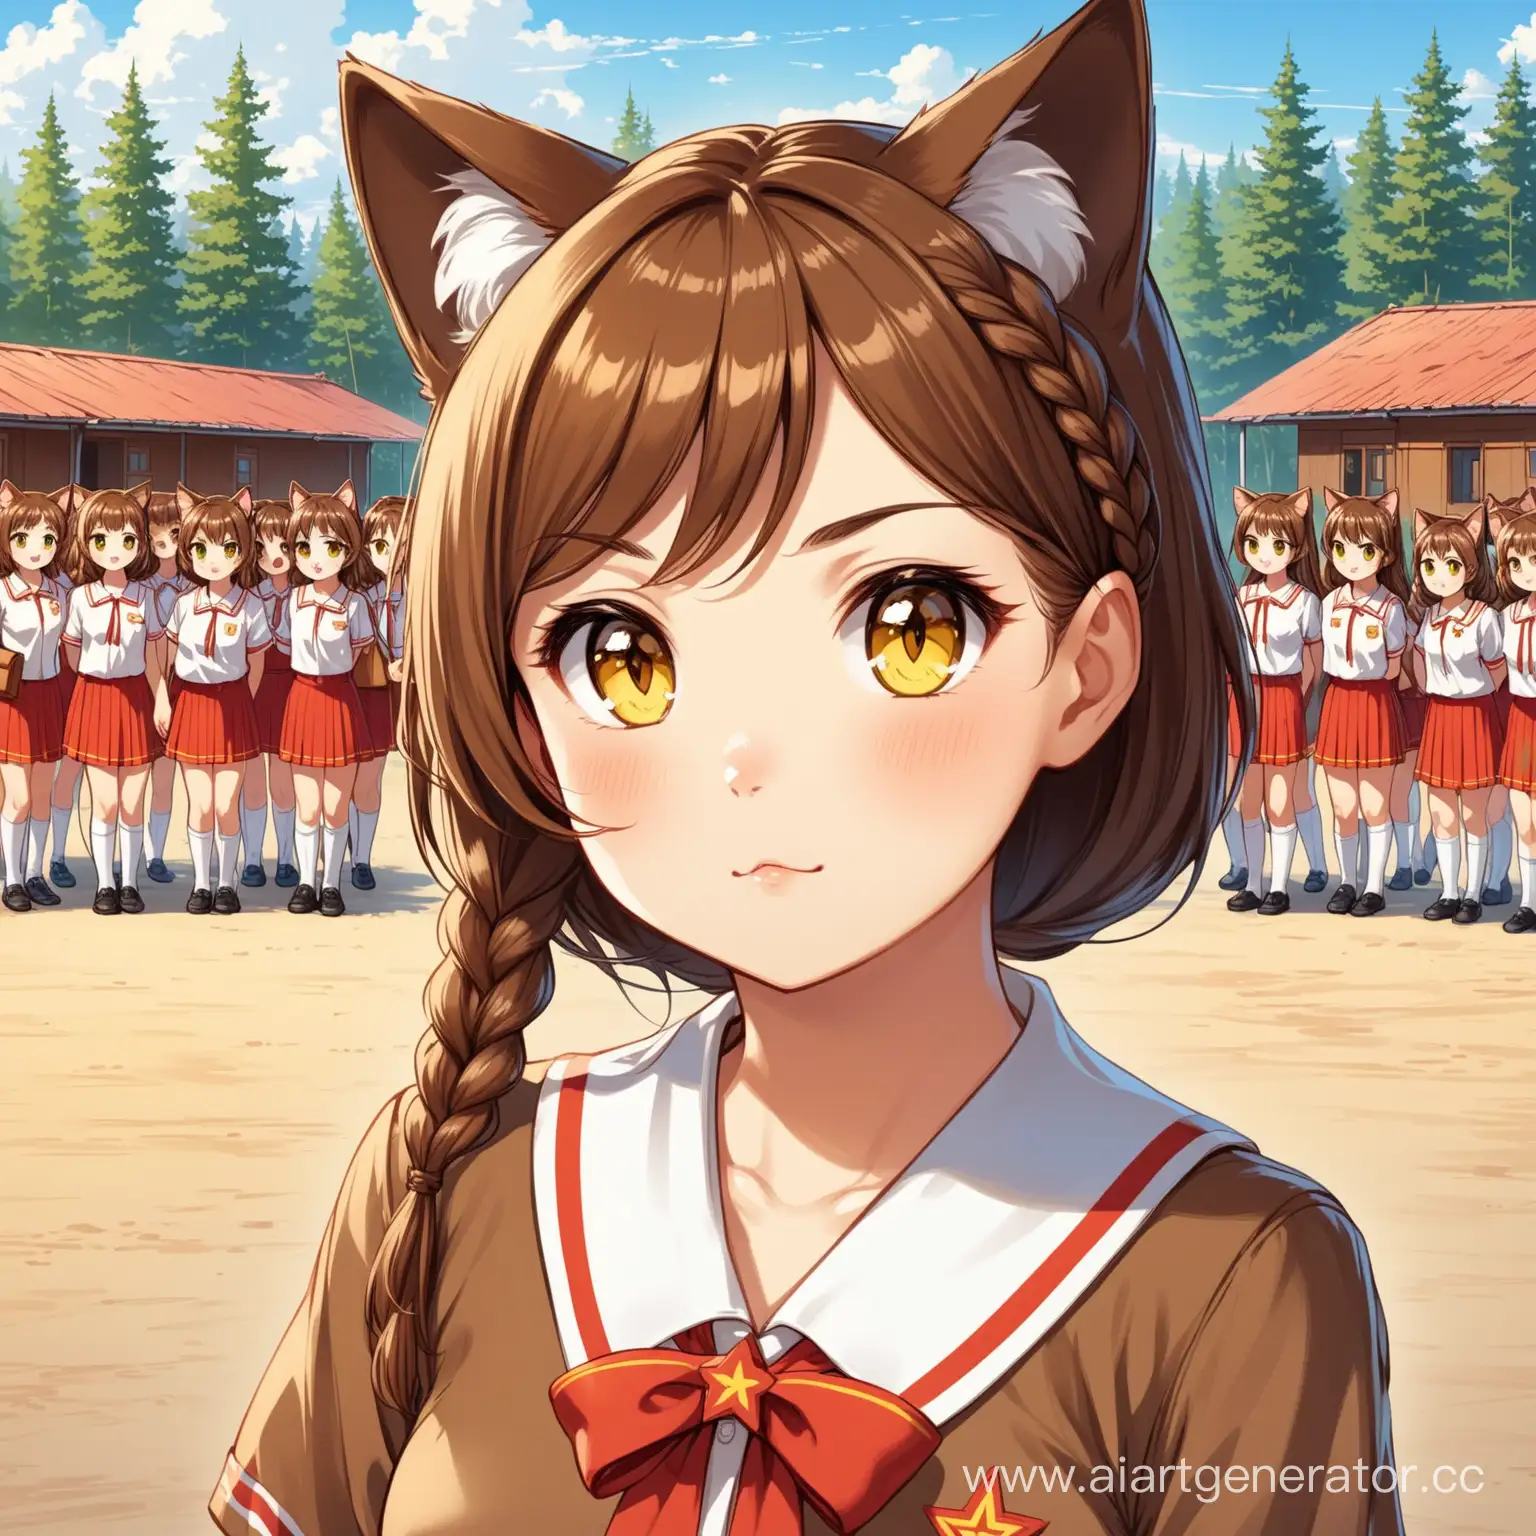 Soviet-Union-Summer-Camp-Catgirl-in-Brown-Uniform-with-Yellow-Eyes-and-Braided-Brown-Hair